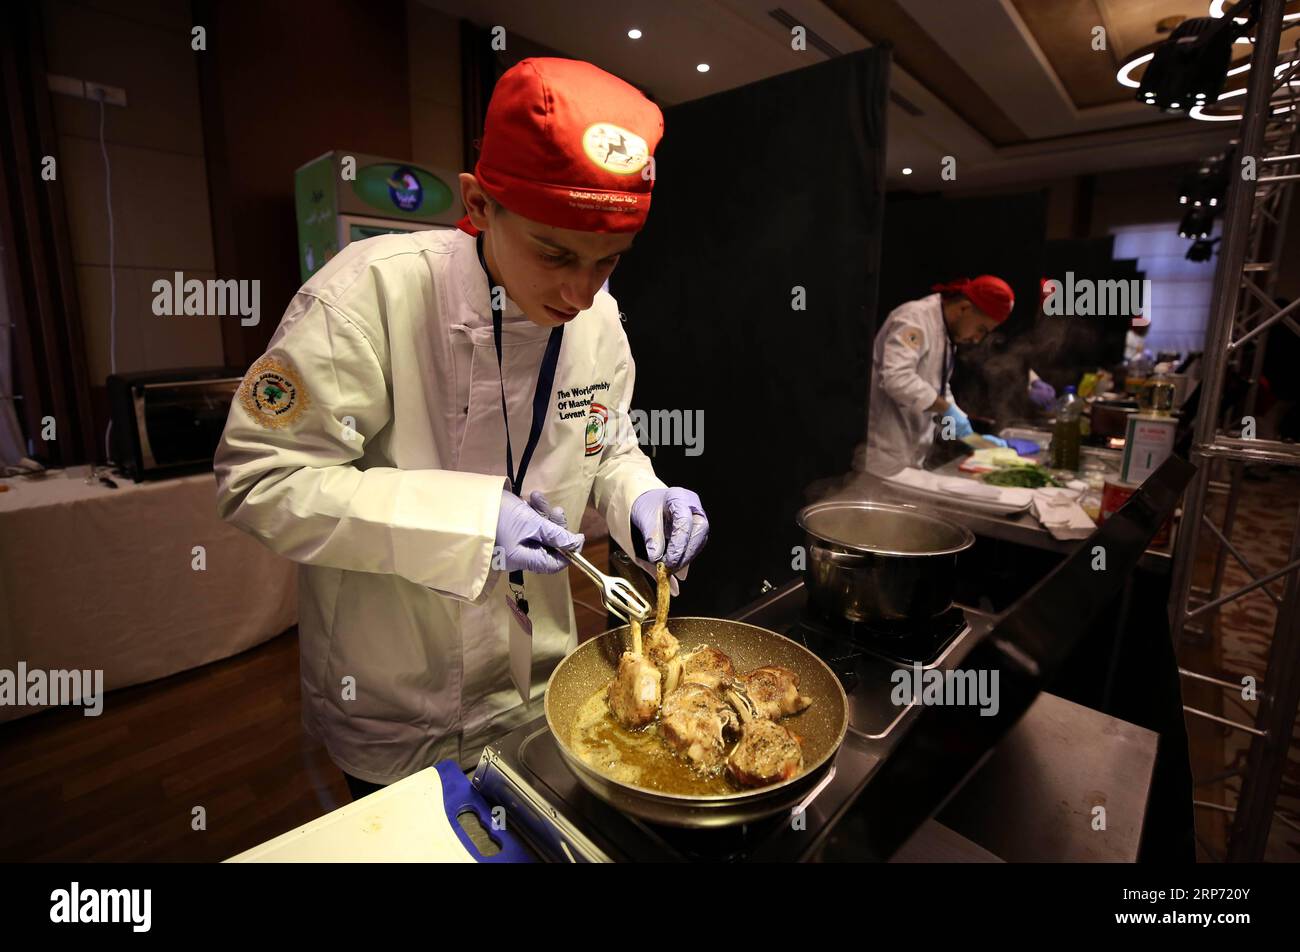 (190124) -- NABLUS, Jan. 24, 2019 -- Chefs take part in a national cooking contest in the West Bank City of Nablus, Jan. 22, 2019. Although similar to the general Mediterranean gastronomical culture, the Palestinian cuisine stands out with an array of tasteful spices and herbs. The newly established master chefs association in Palestine organized a national cooking contest, with the aim of choosing the winning chefs to join a national team that will be trained to compete internationally. Over 150 Palestinian chefs gathered at the contest for three days in West Bank s Nablus city, presenting tr Stock Photo